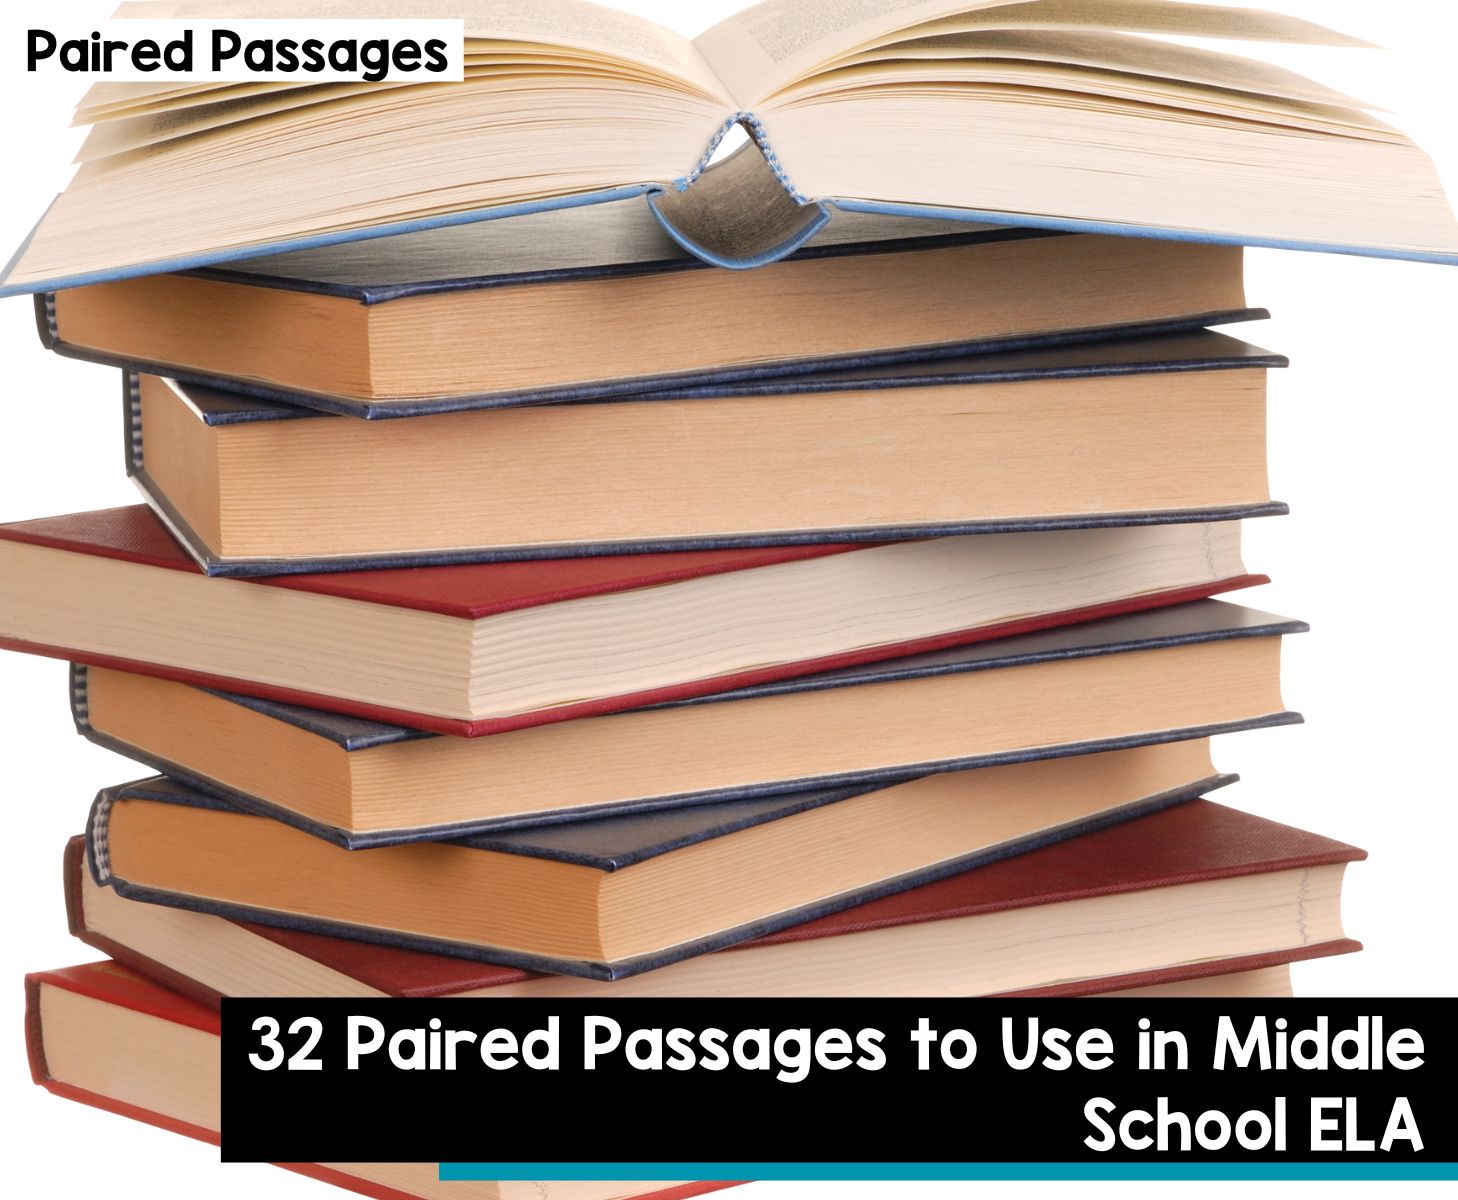 32 Paired Passages to use in middle school ELA